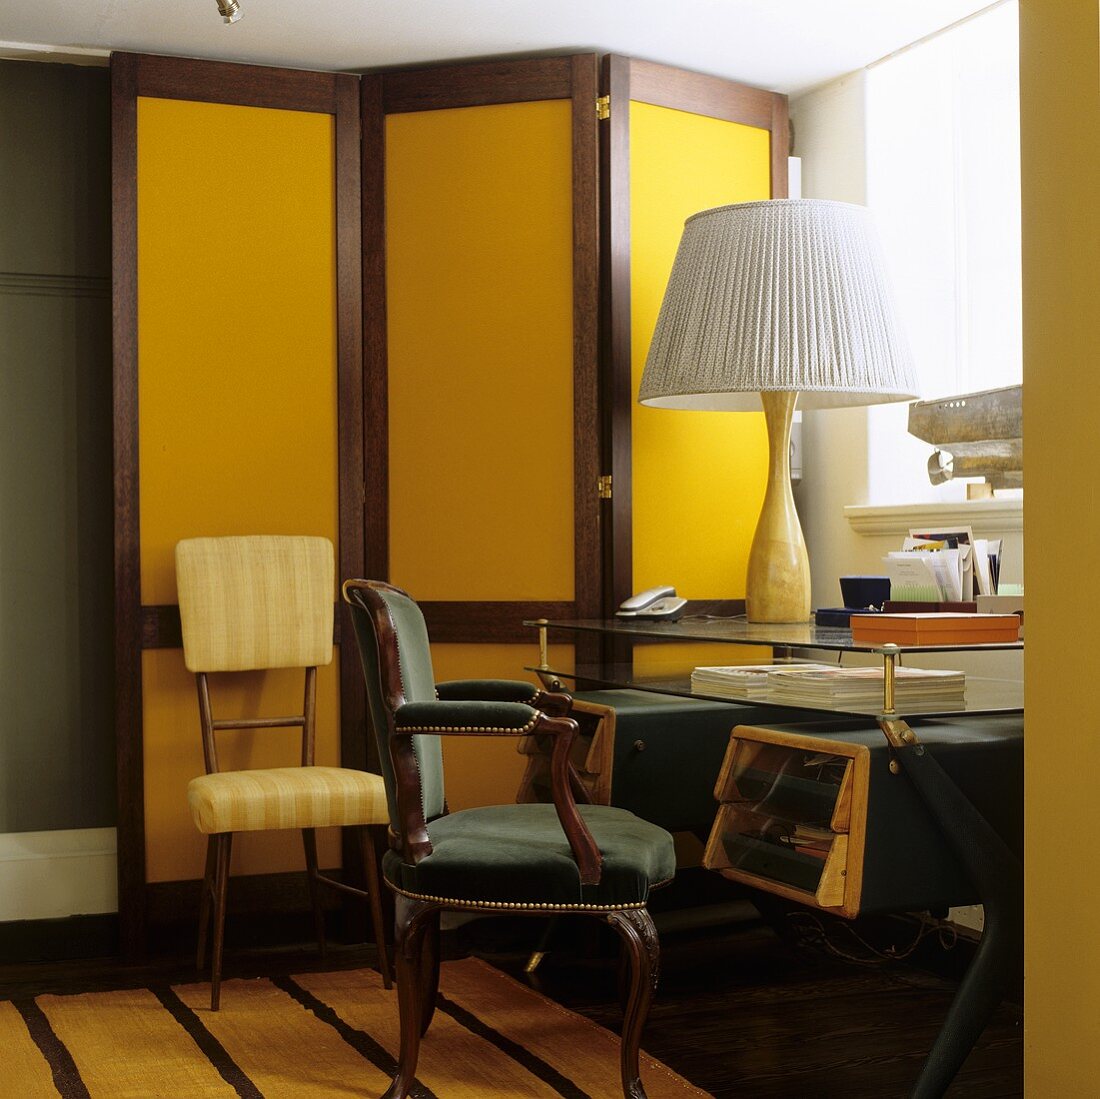 An antique desk chair in front of a glass table with a table lamp with a white pleated shade in front of a yellow paravent